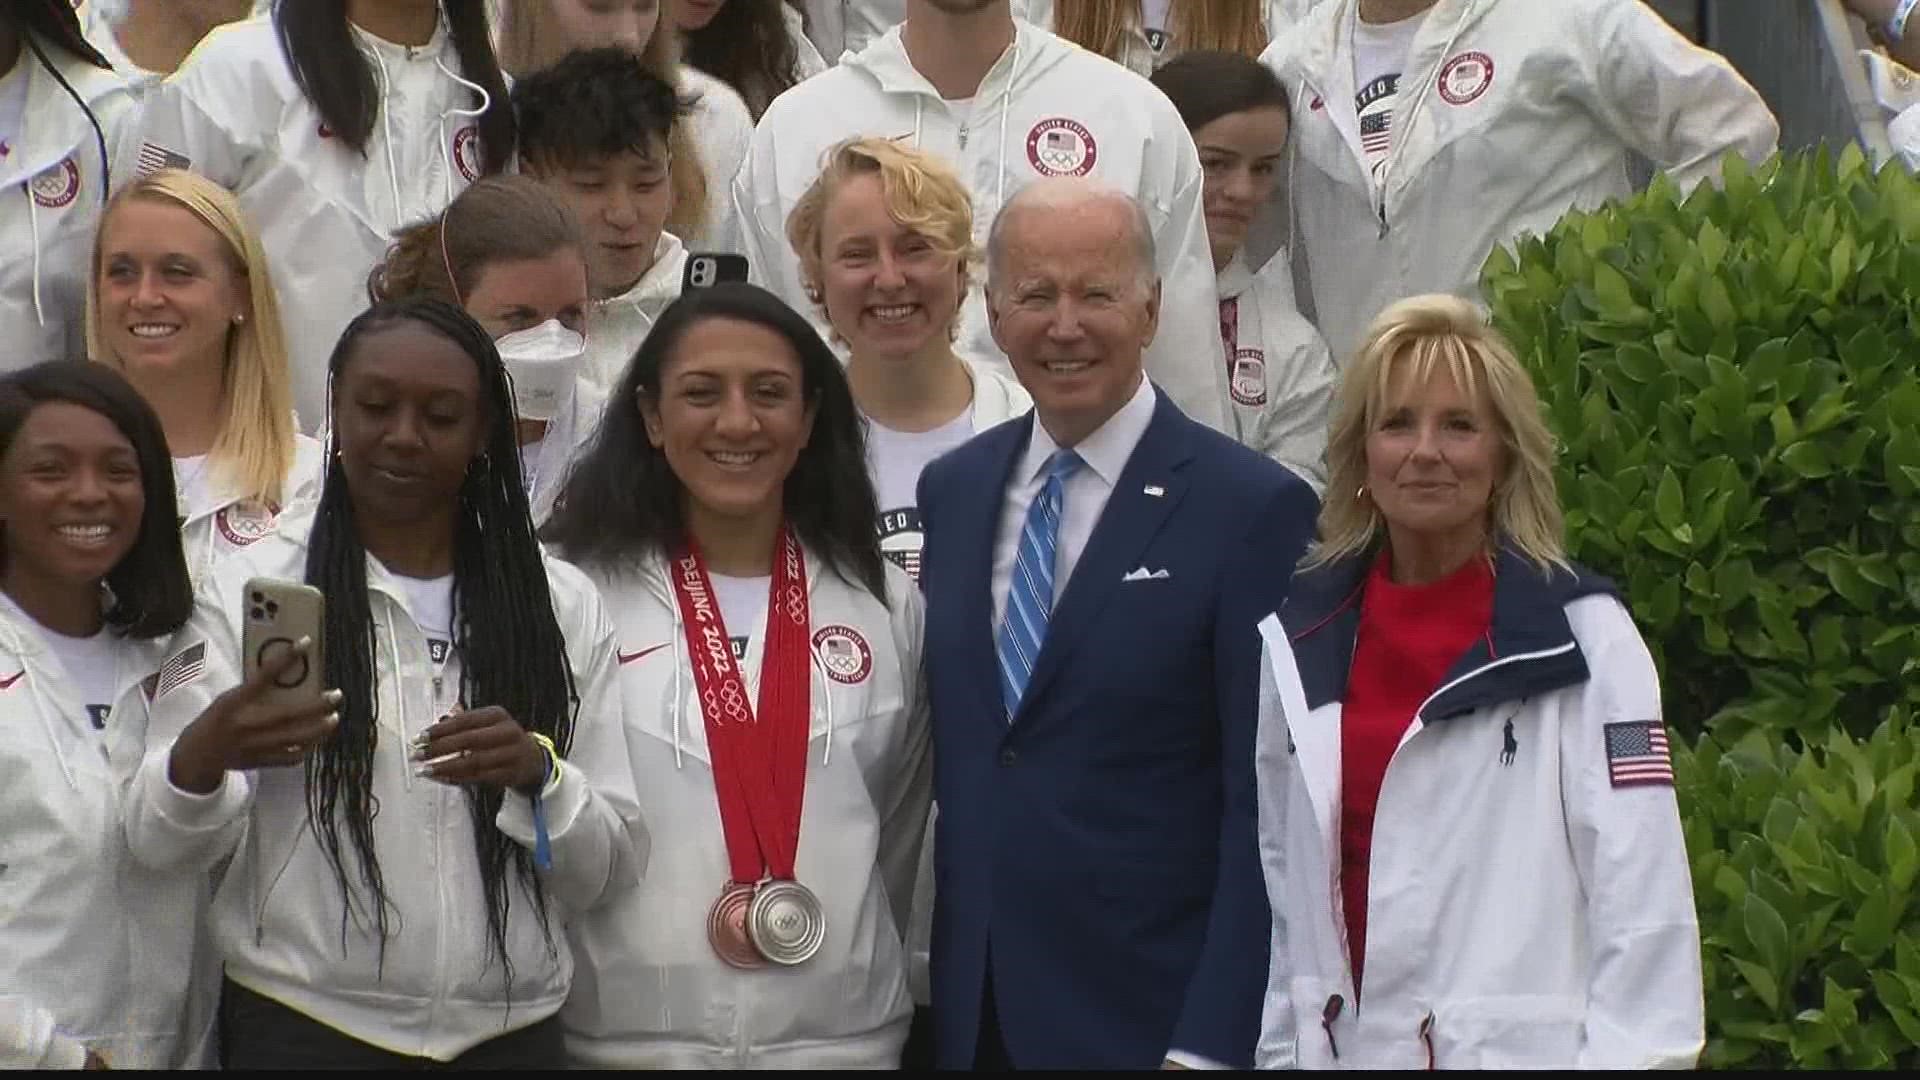 Winter Olympian Elana Meyers Taylor and Summer Olympian Kenny Selmon from Mableton were hosted by President Biden, along with hundreds of other Olympians.